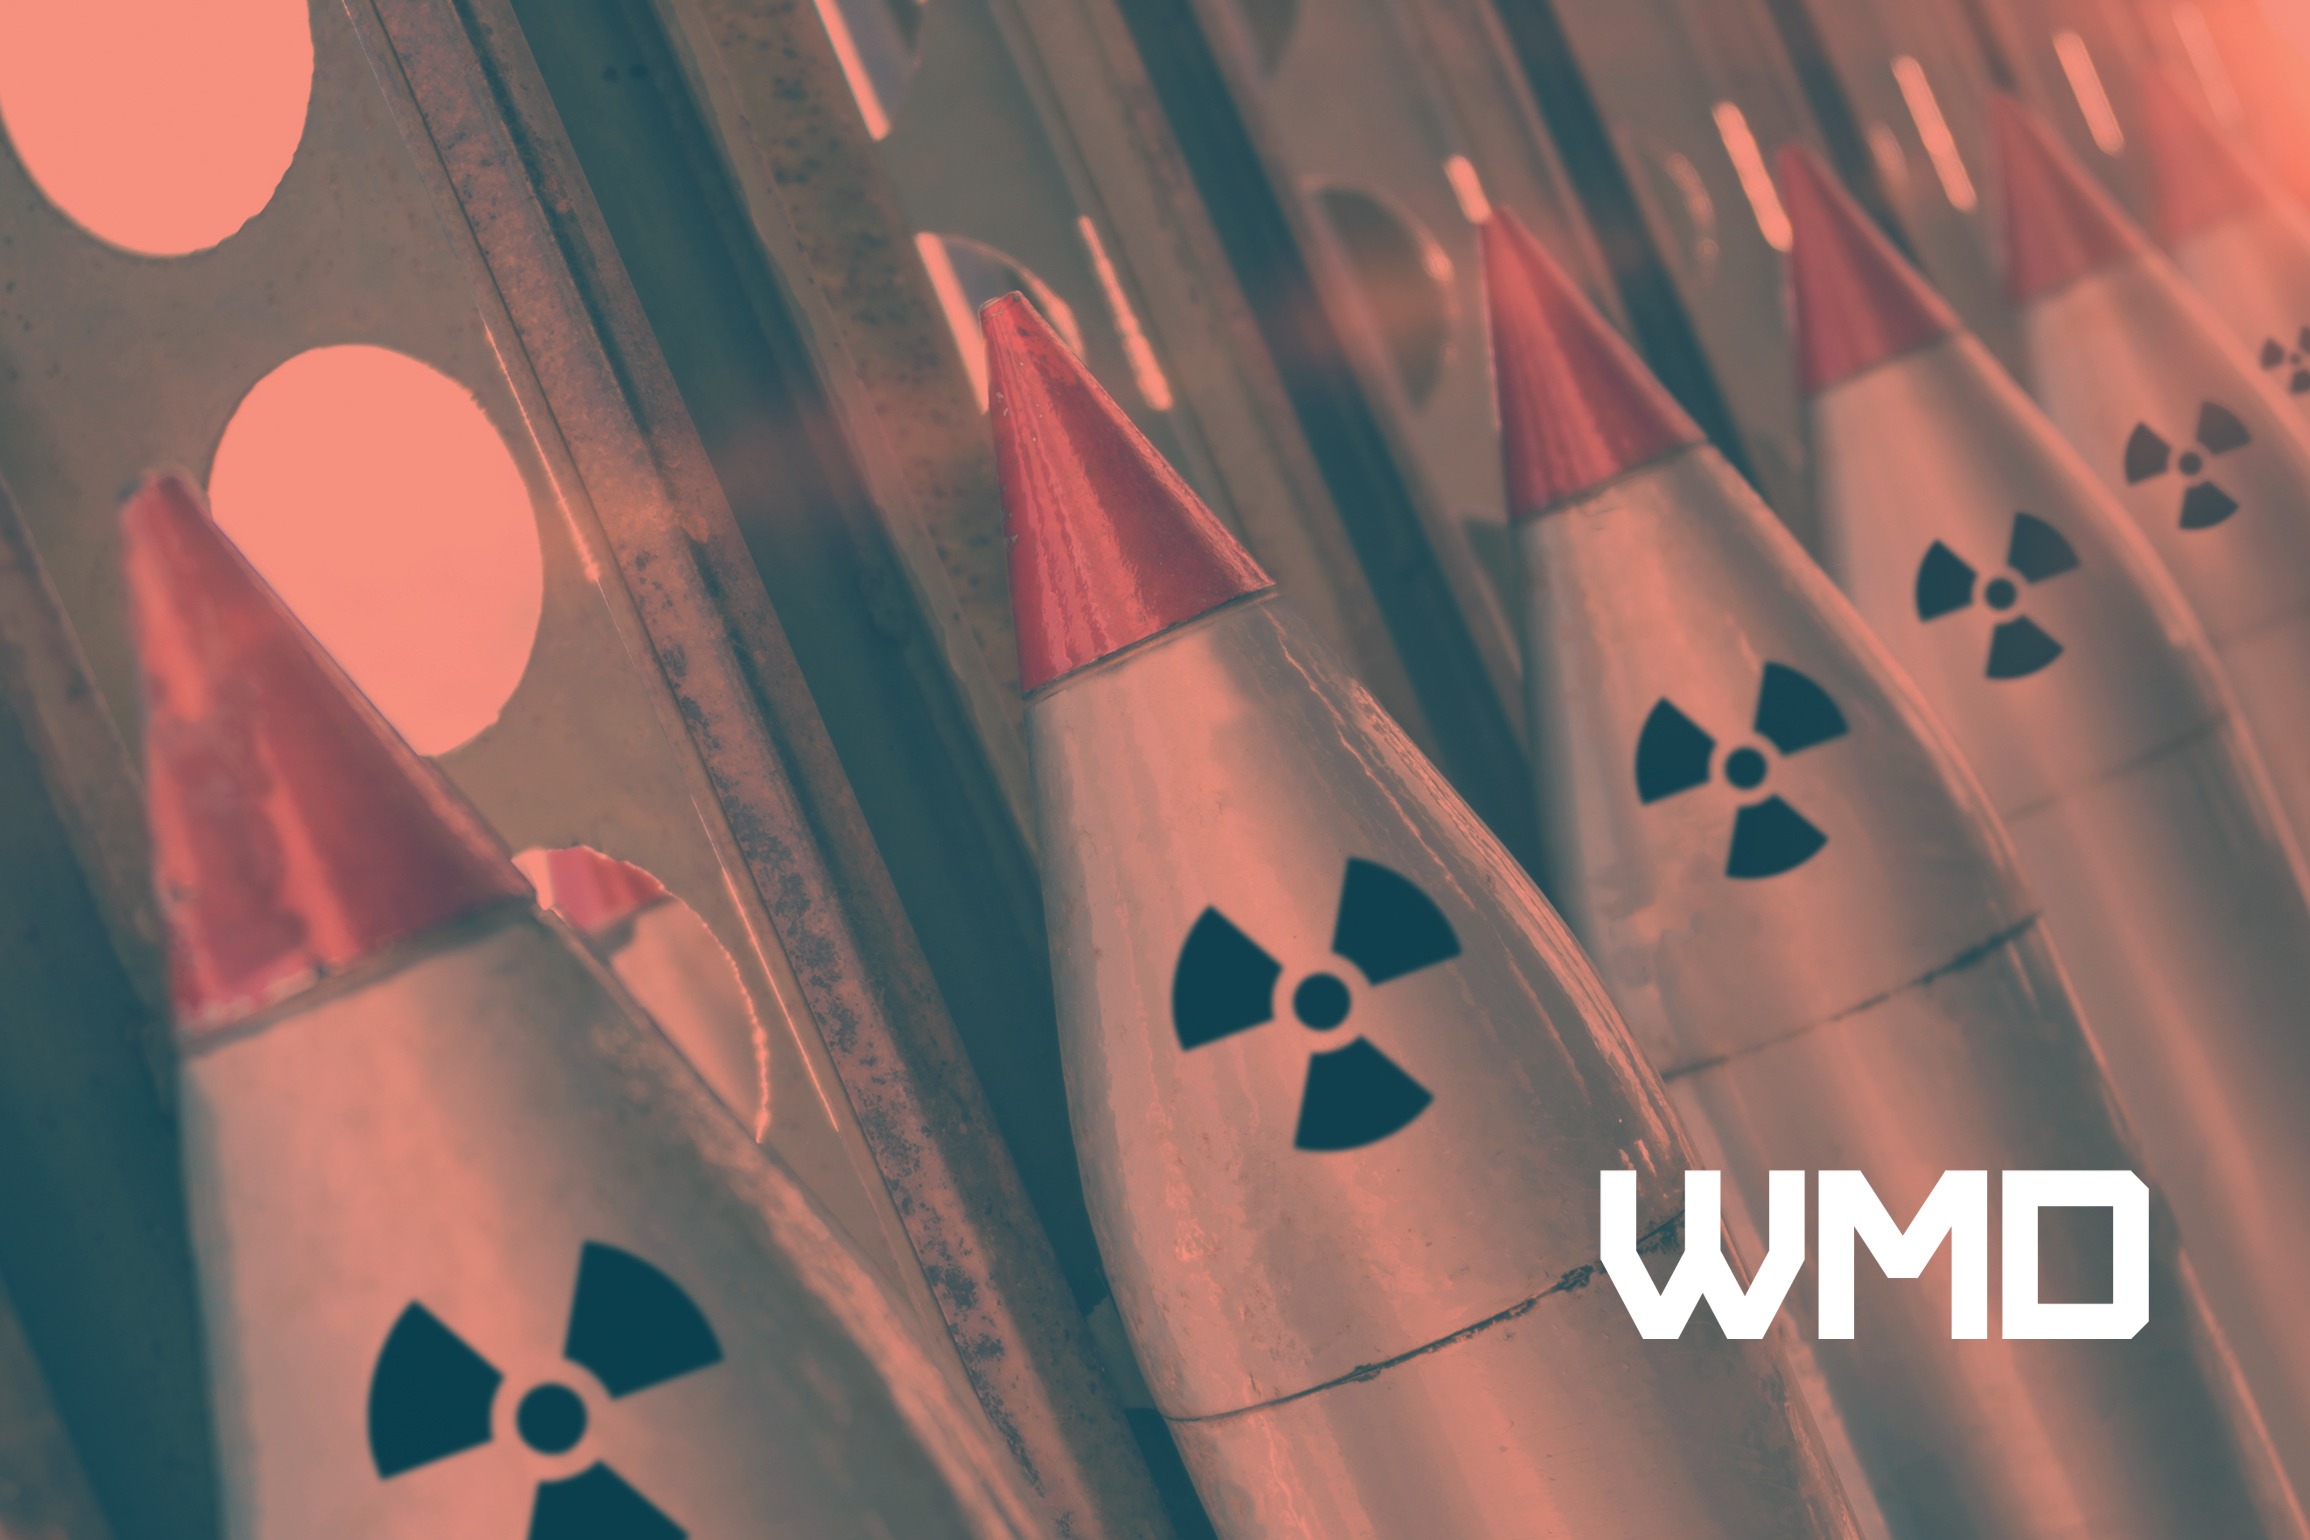 [WMD] Nuclear-Capable Missiles